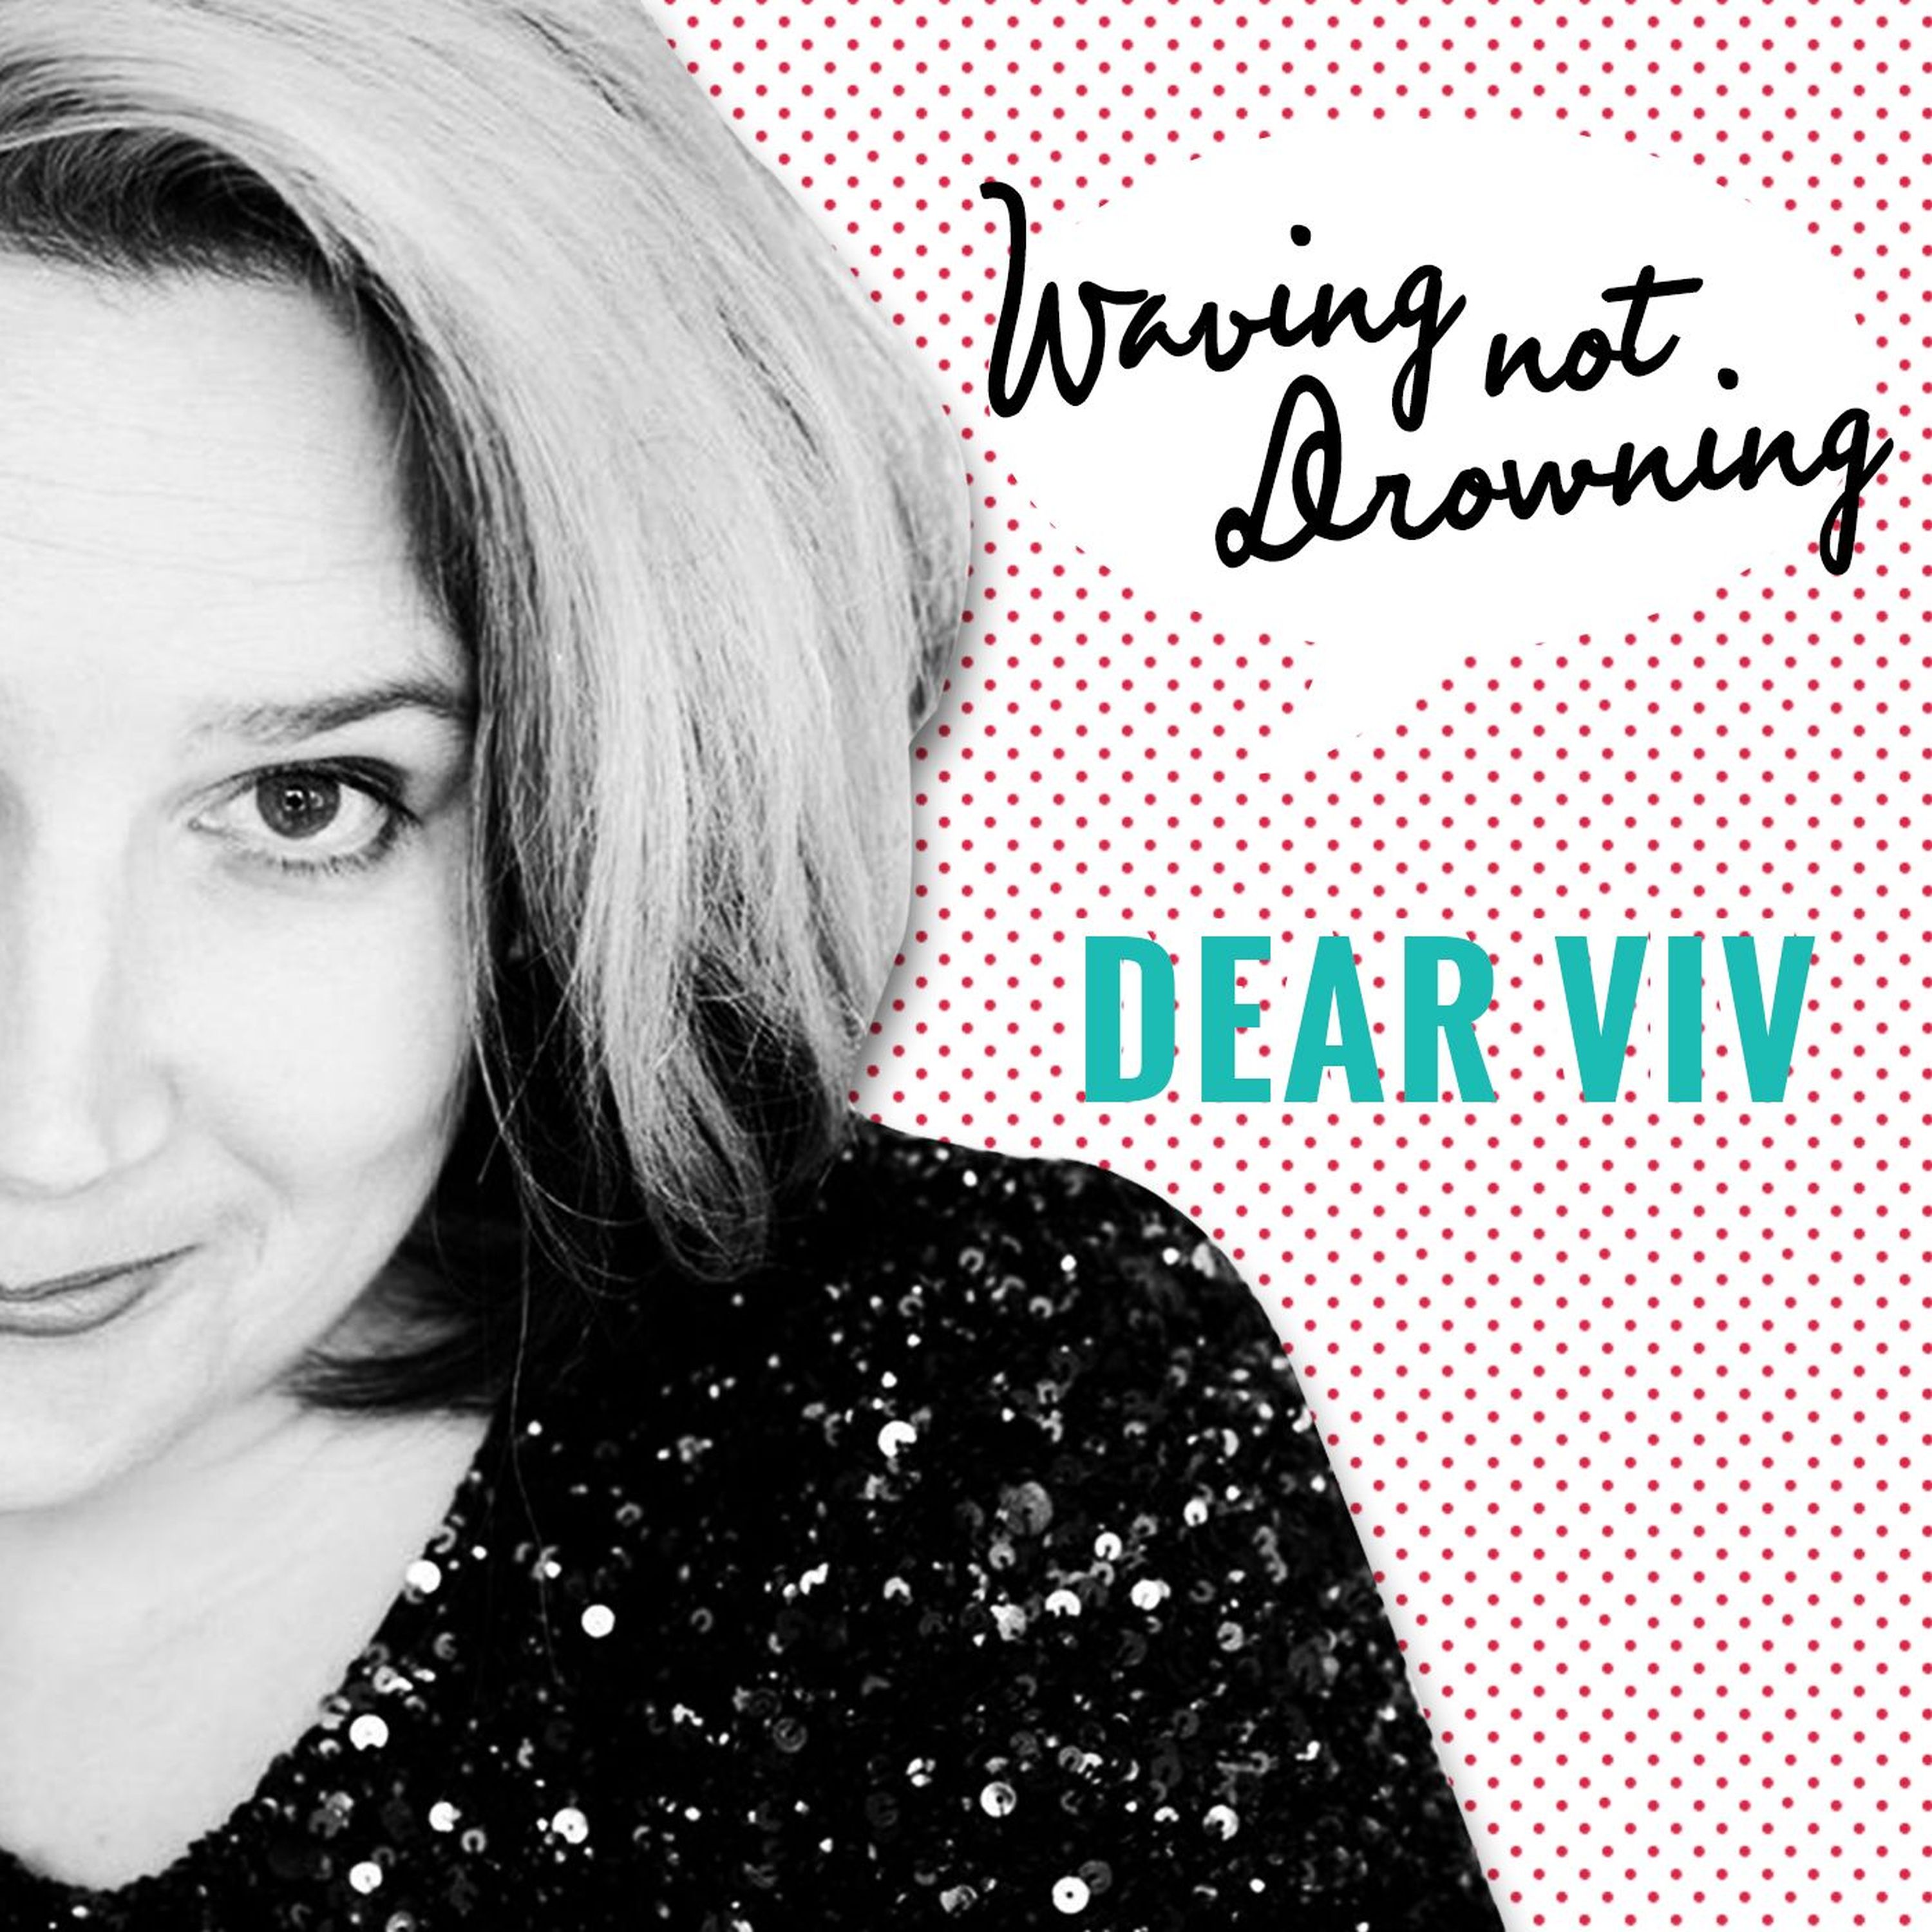 Dear Viv: I’m gay, should I continue to tolerate my family’s homophobia?